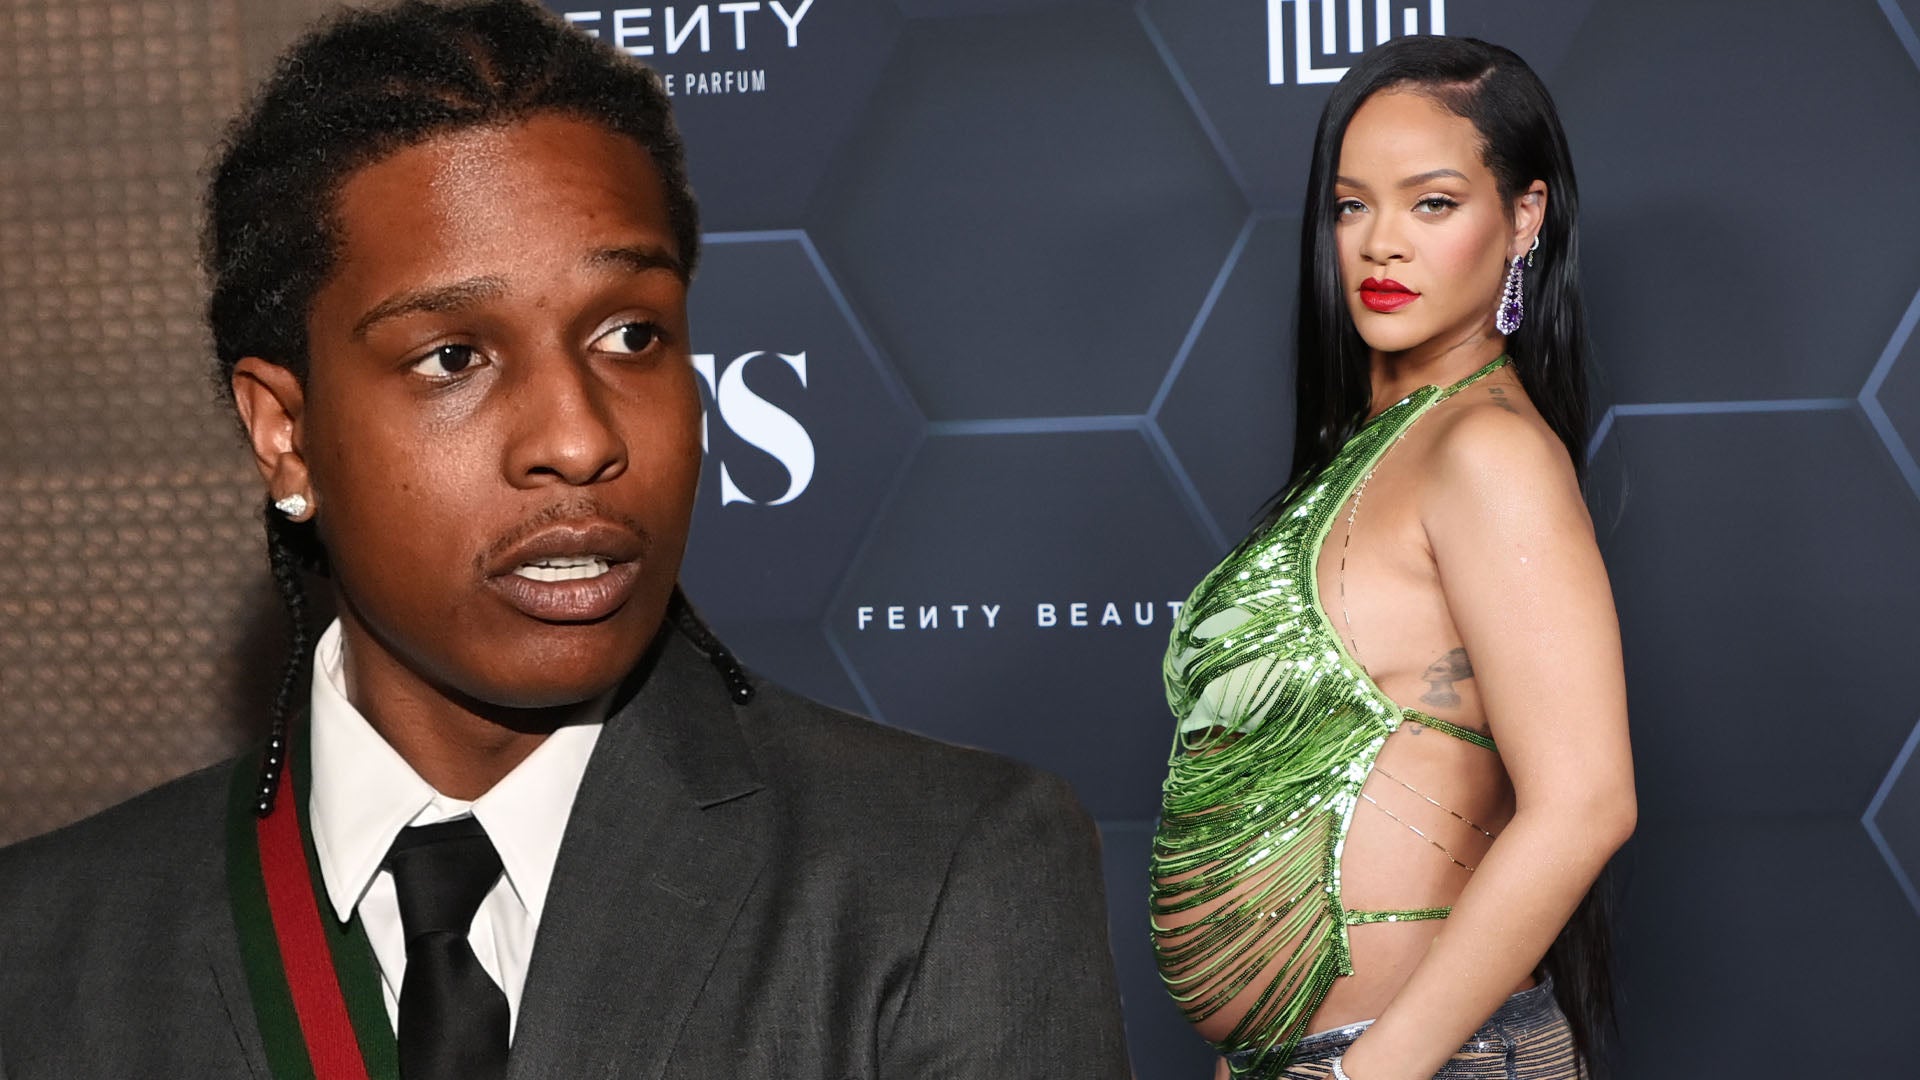 Rihanna and A$AP Rocky walk hand-in-hand as they step out for dinner date  in Barbados; put breakup rumours to rest